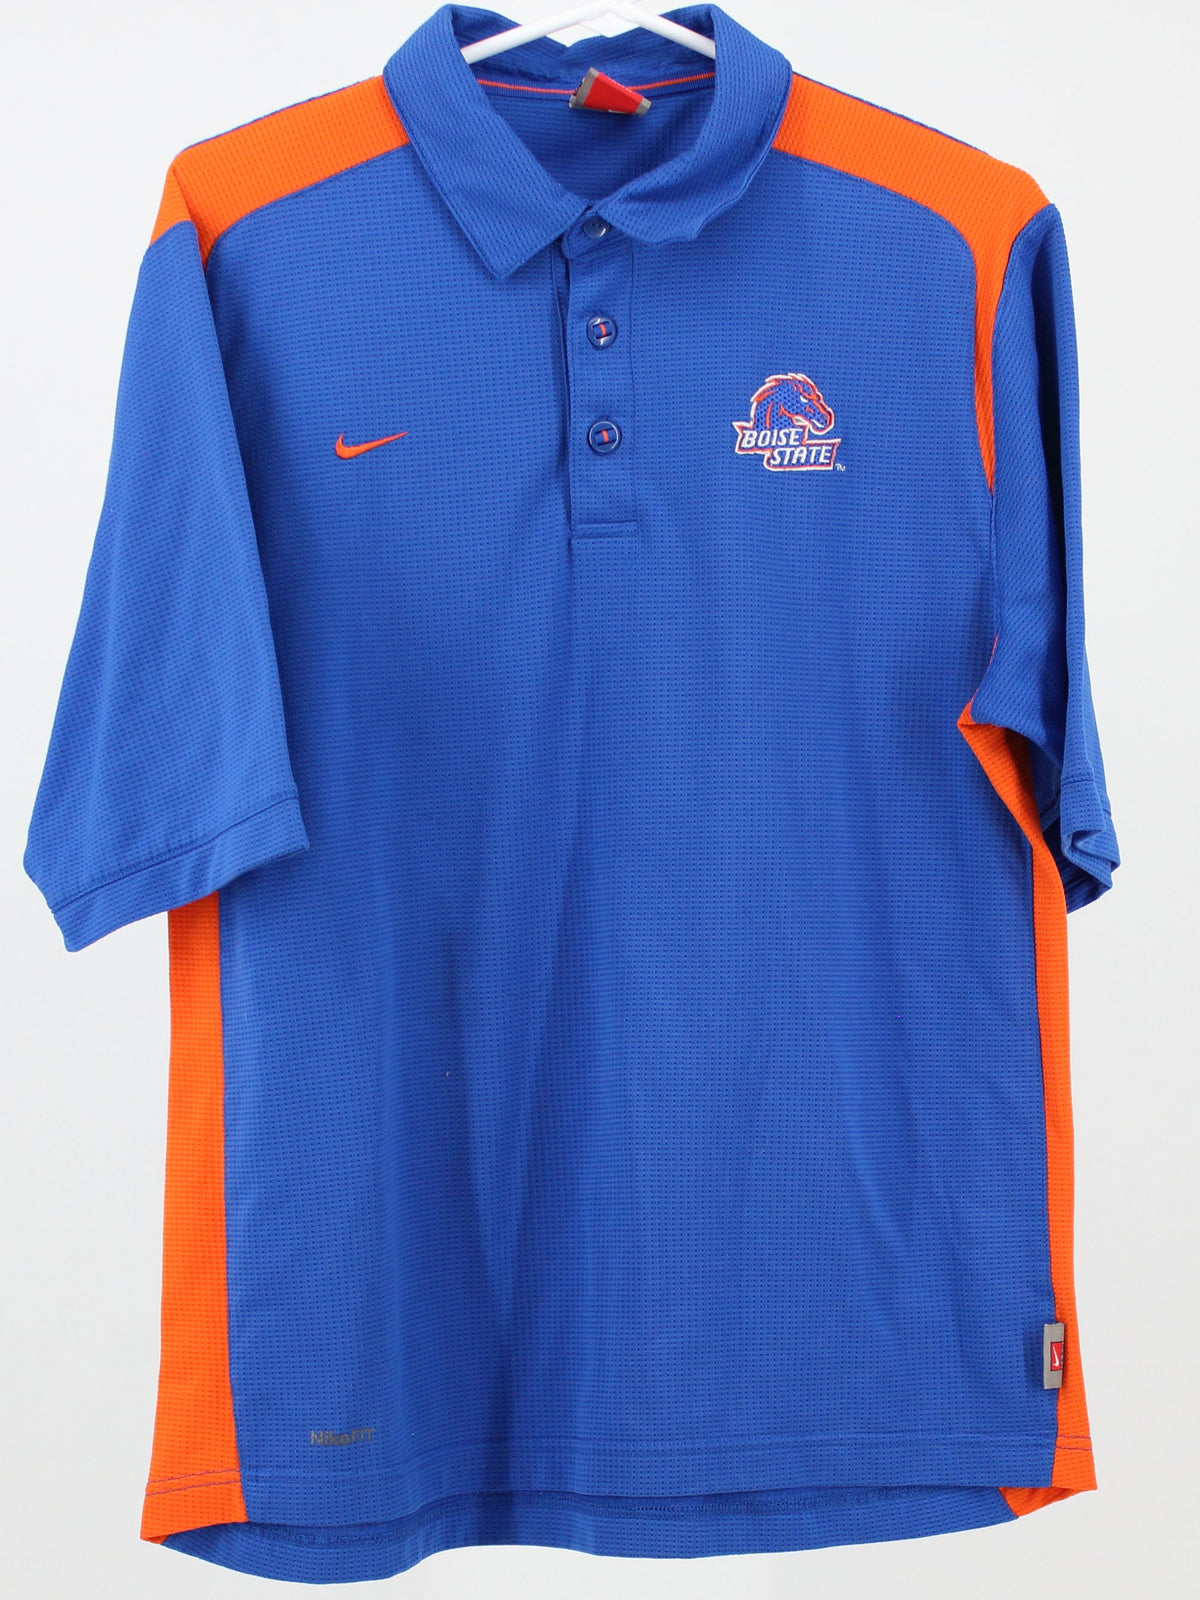 Nike Boise State Dry Fit Golf Shirt